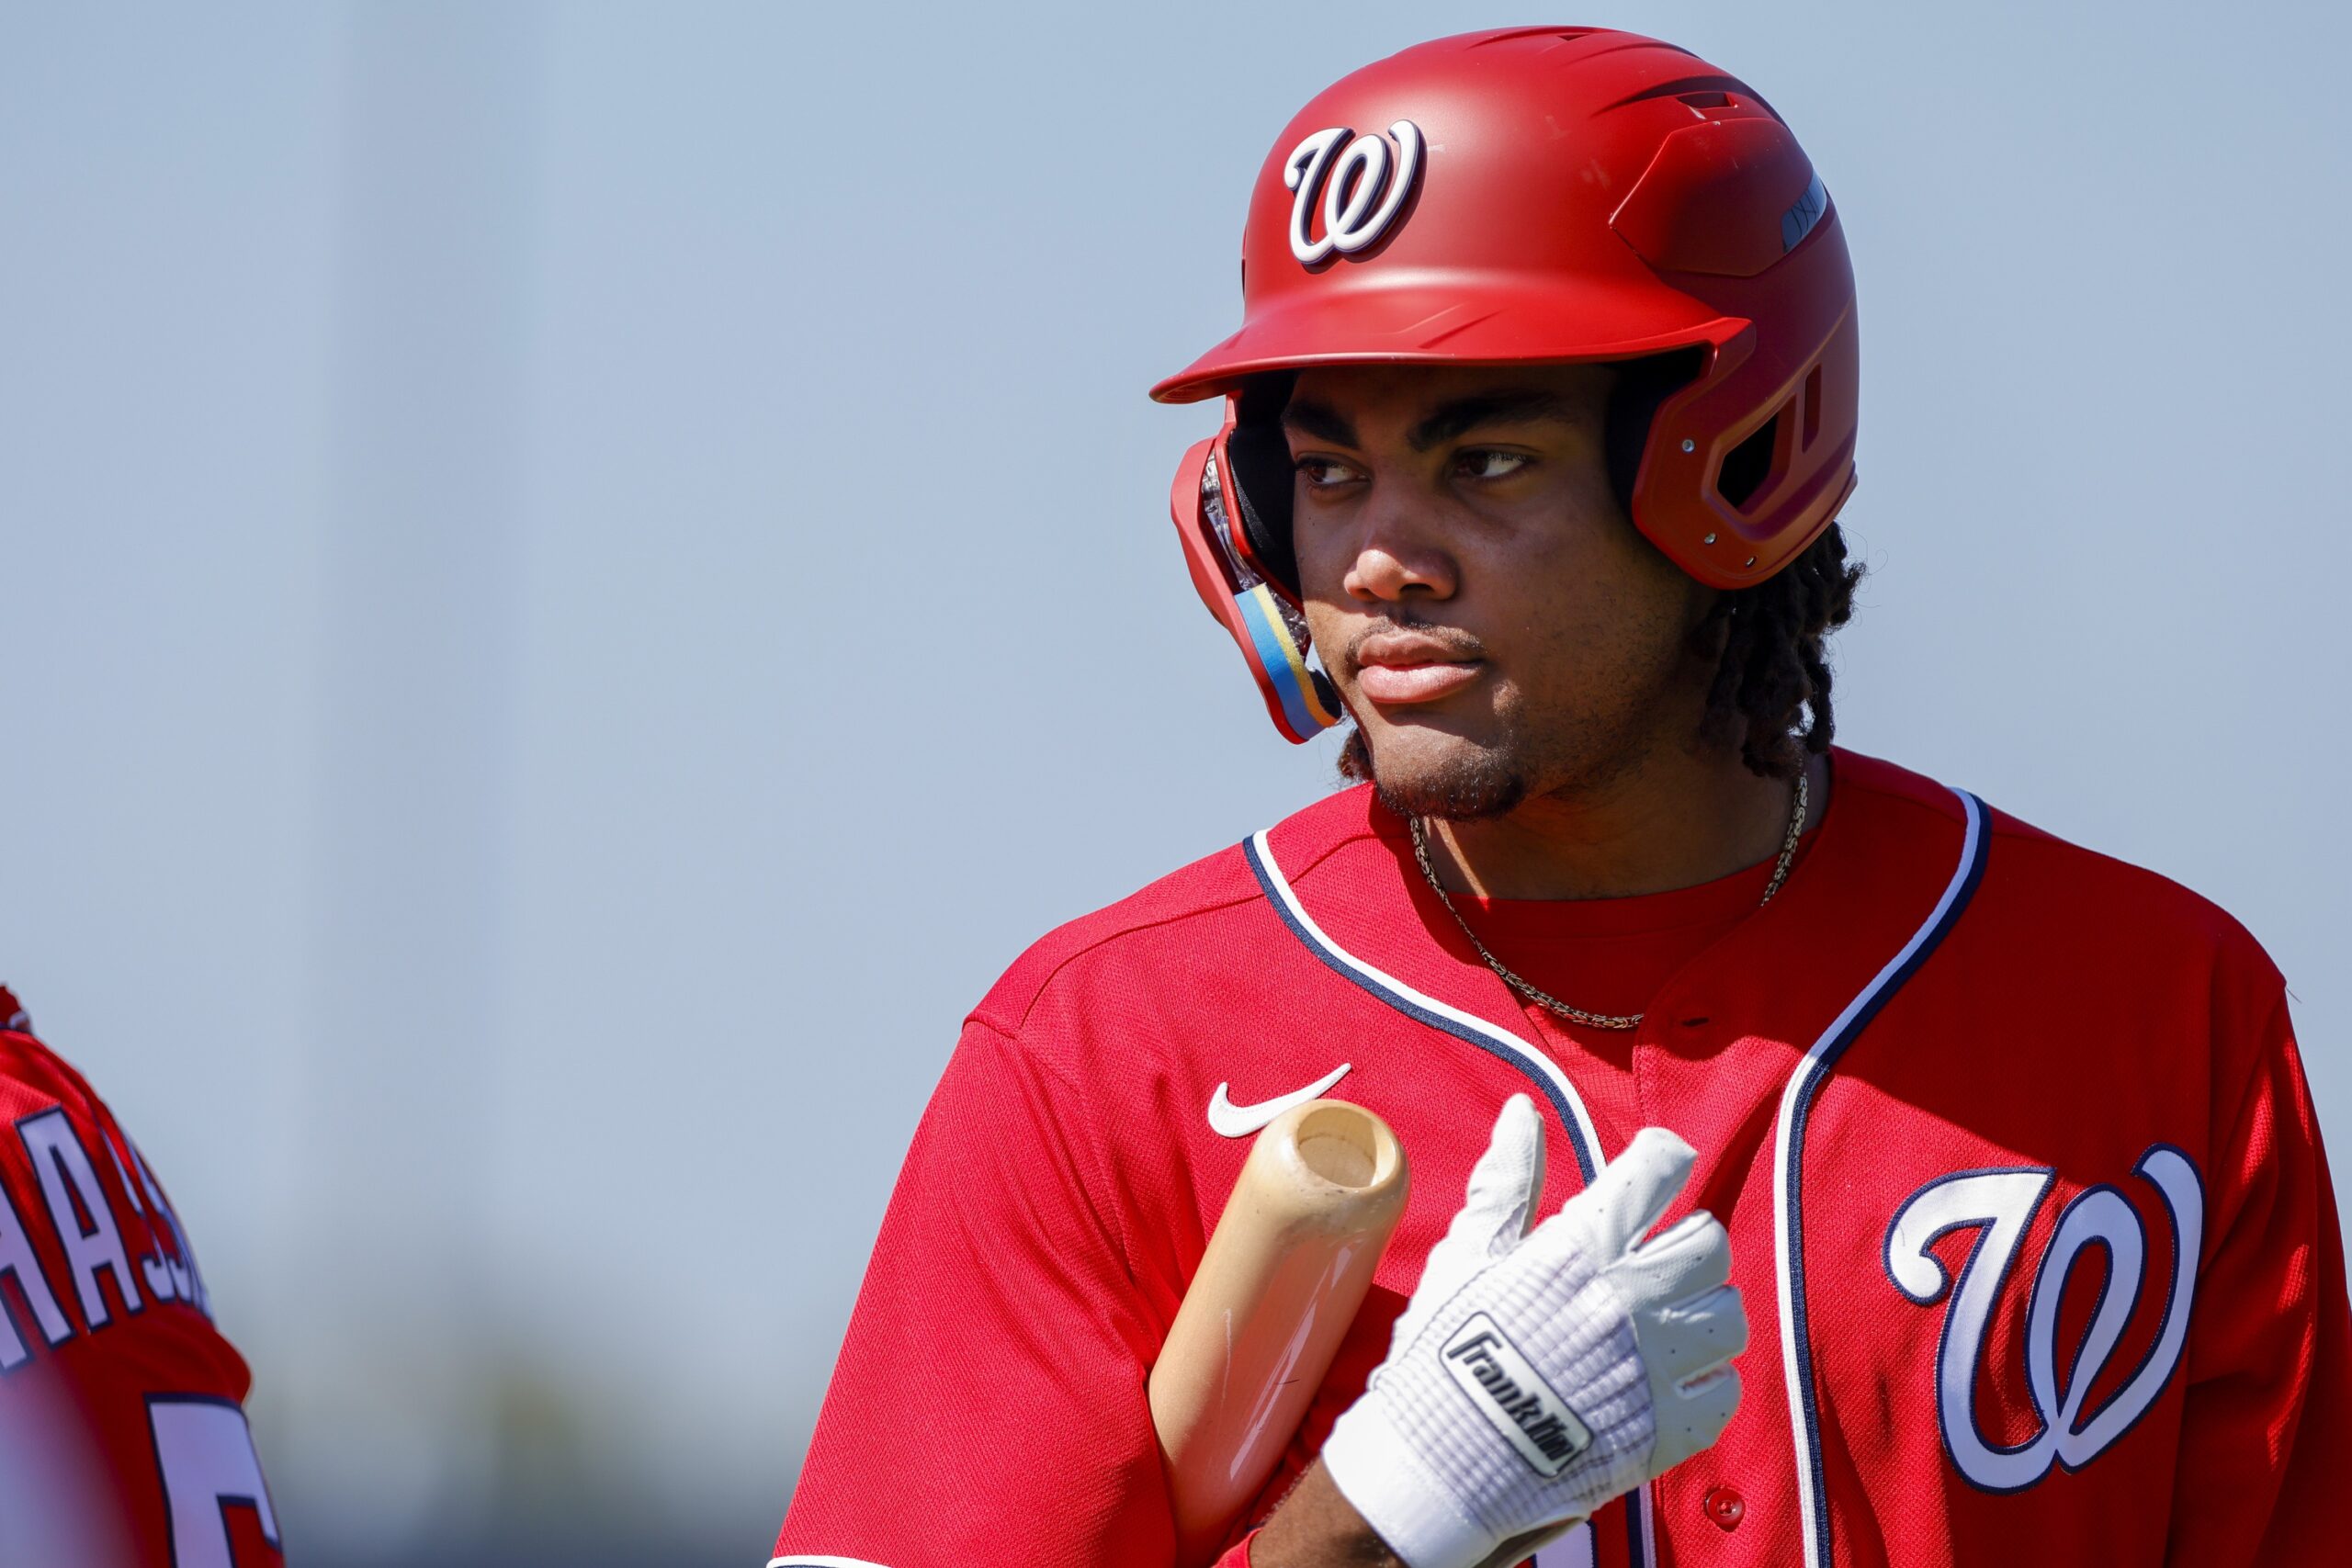 Top Washington Nationals Prospects Head to the Minors